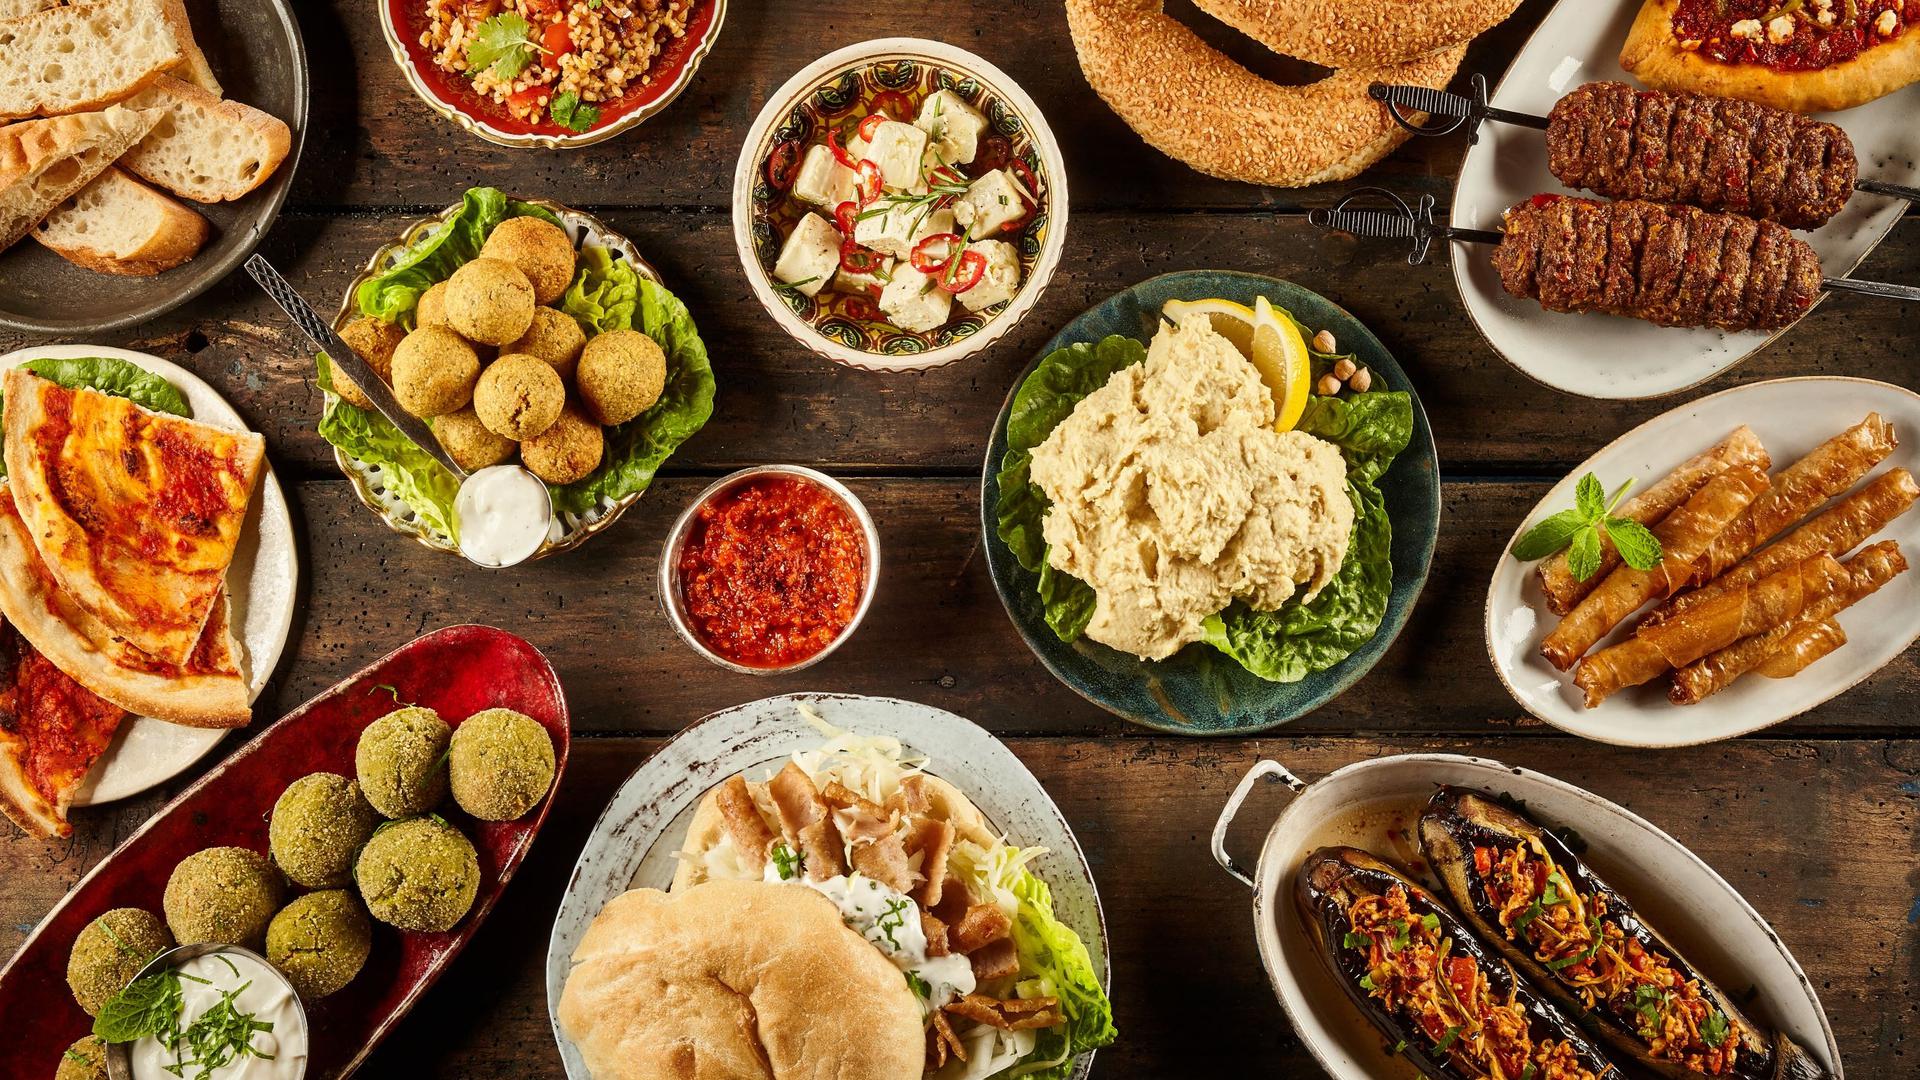 There are several Moroccan, Lebanese and Syrian restaurants where you can sample cold and hot mezze and sharing plates